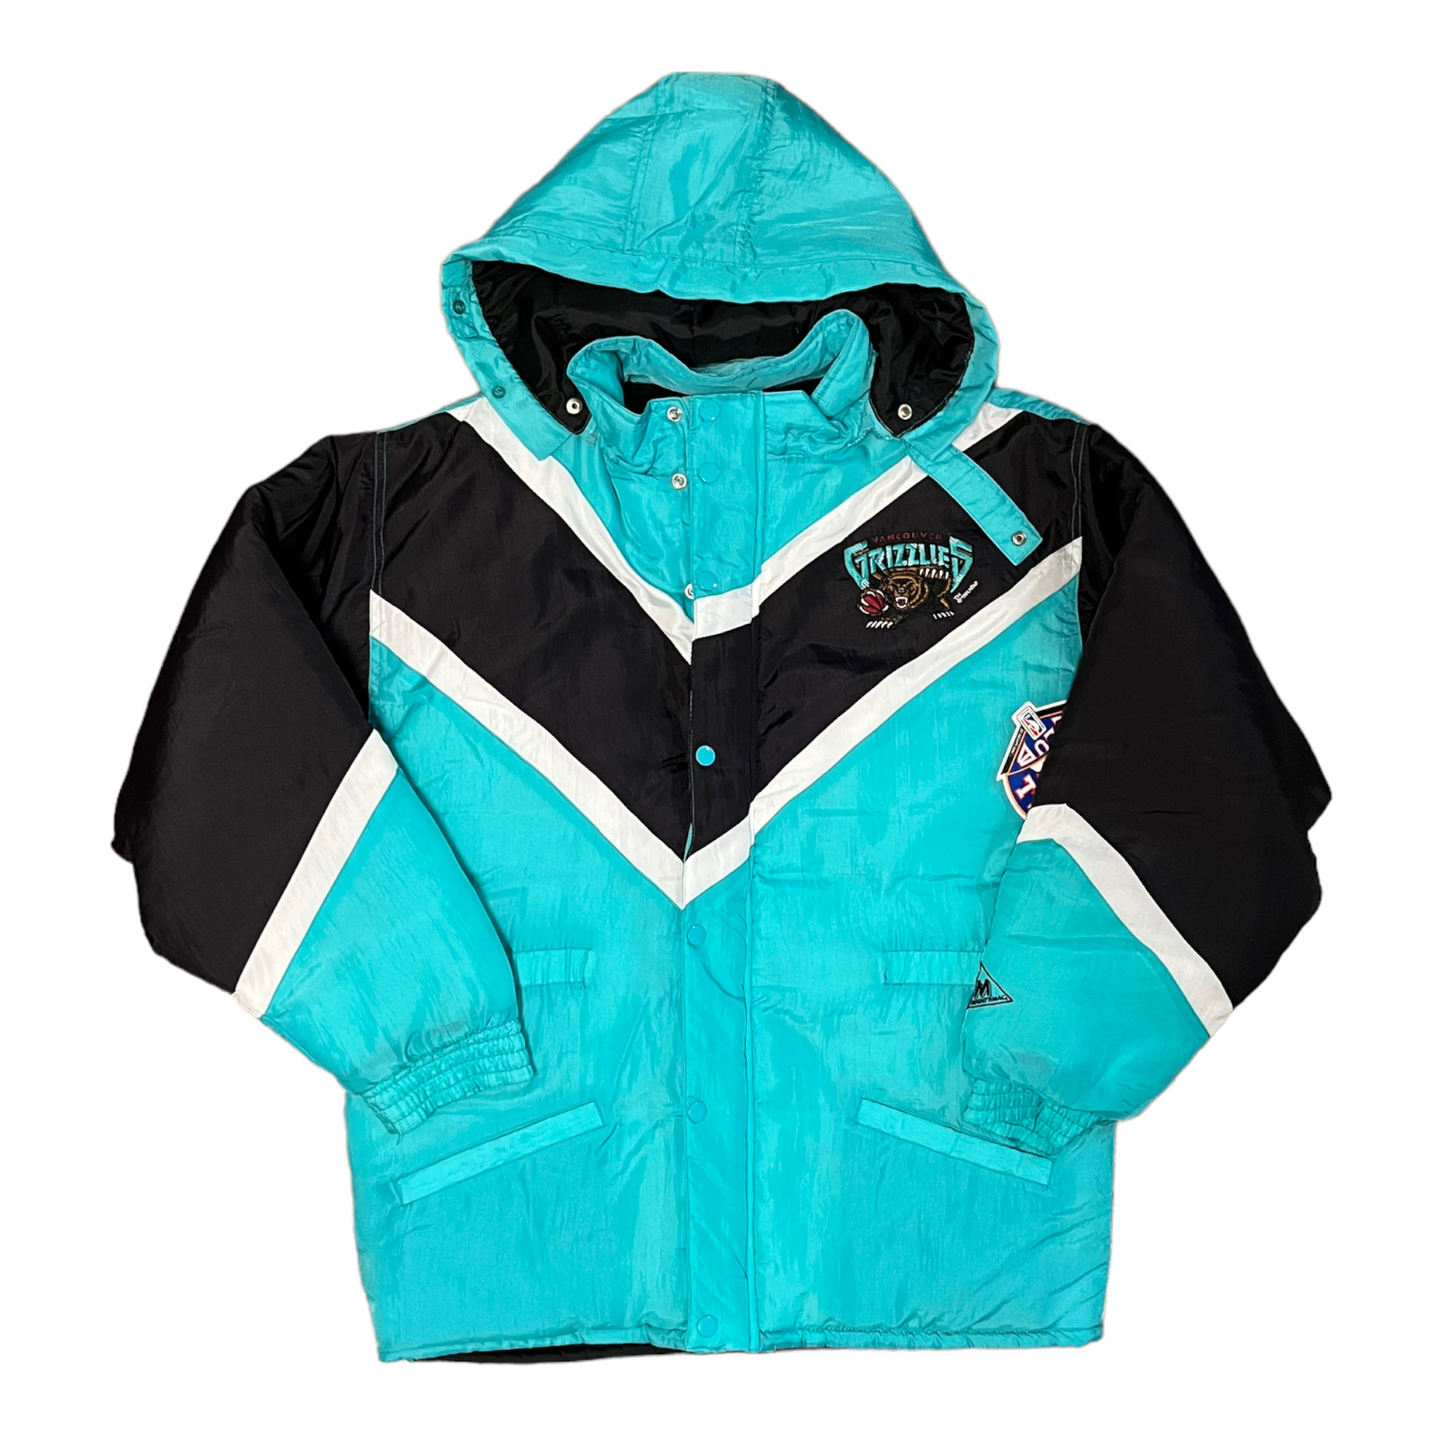 Vintage Vancouver Grizzlies Mighty Mac BNWT puffer jacket L